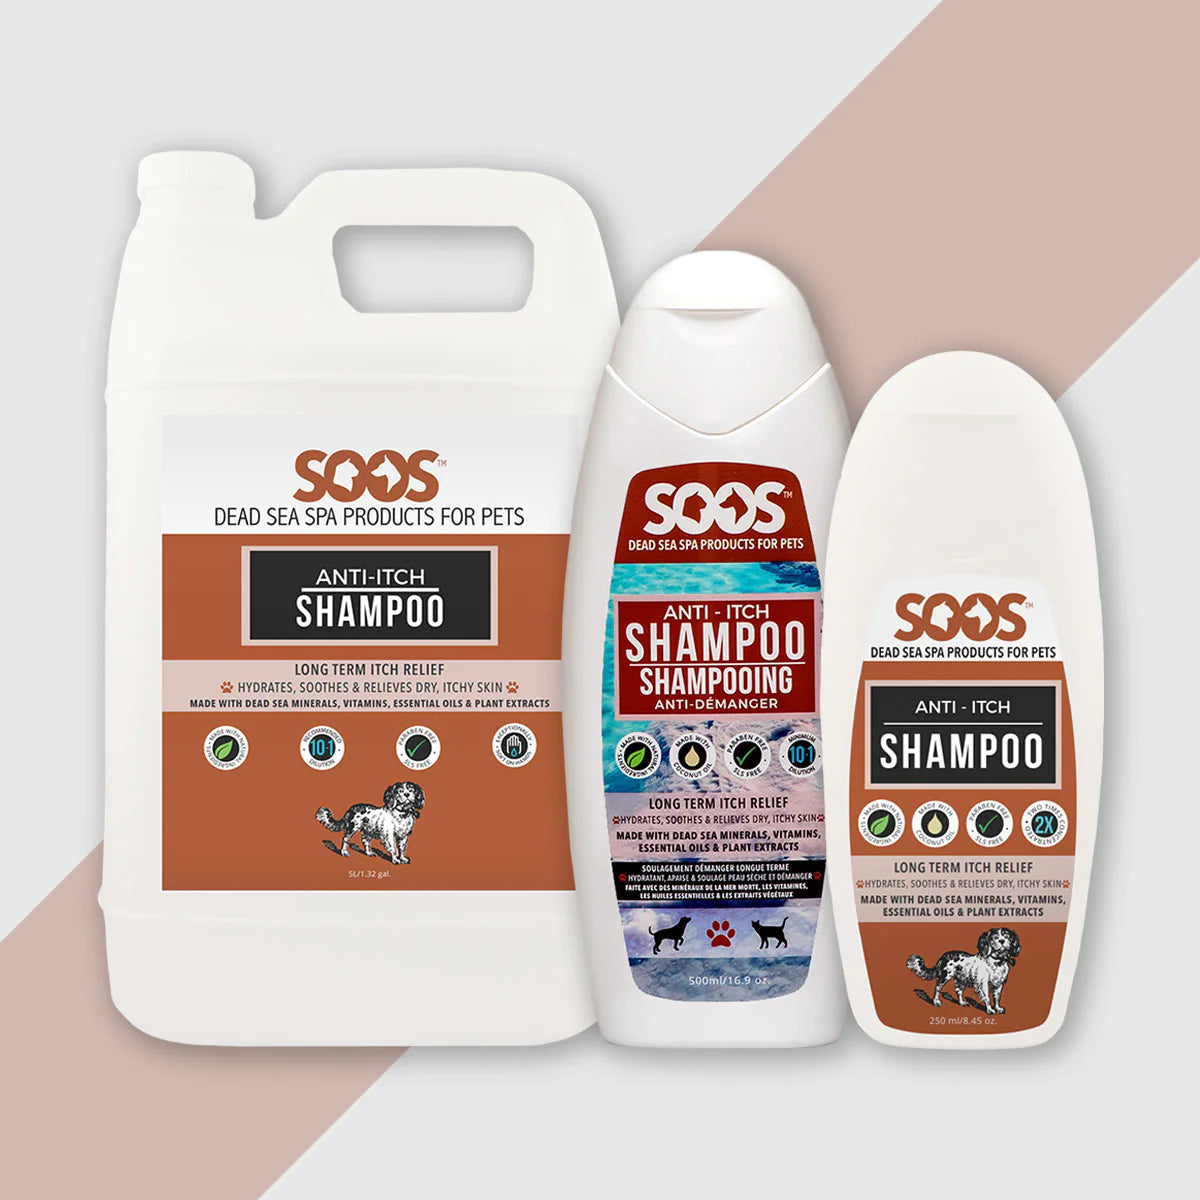 Soos™ Natural Anti-Itch Pet Shampoo works to soothe intense itching with an infusion of Dead Sea minerals, zinc, green tea, chamomile and tea tree oil. The blend of natural ingredients relieves irritation while providing essential nutrients for healthy, hydrated skin.